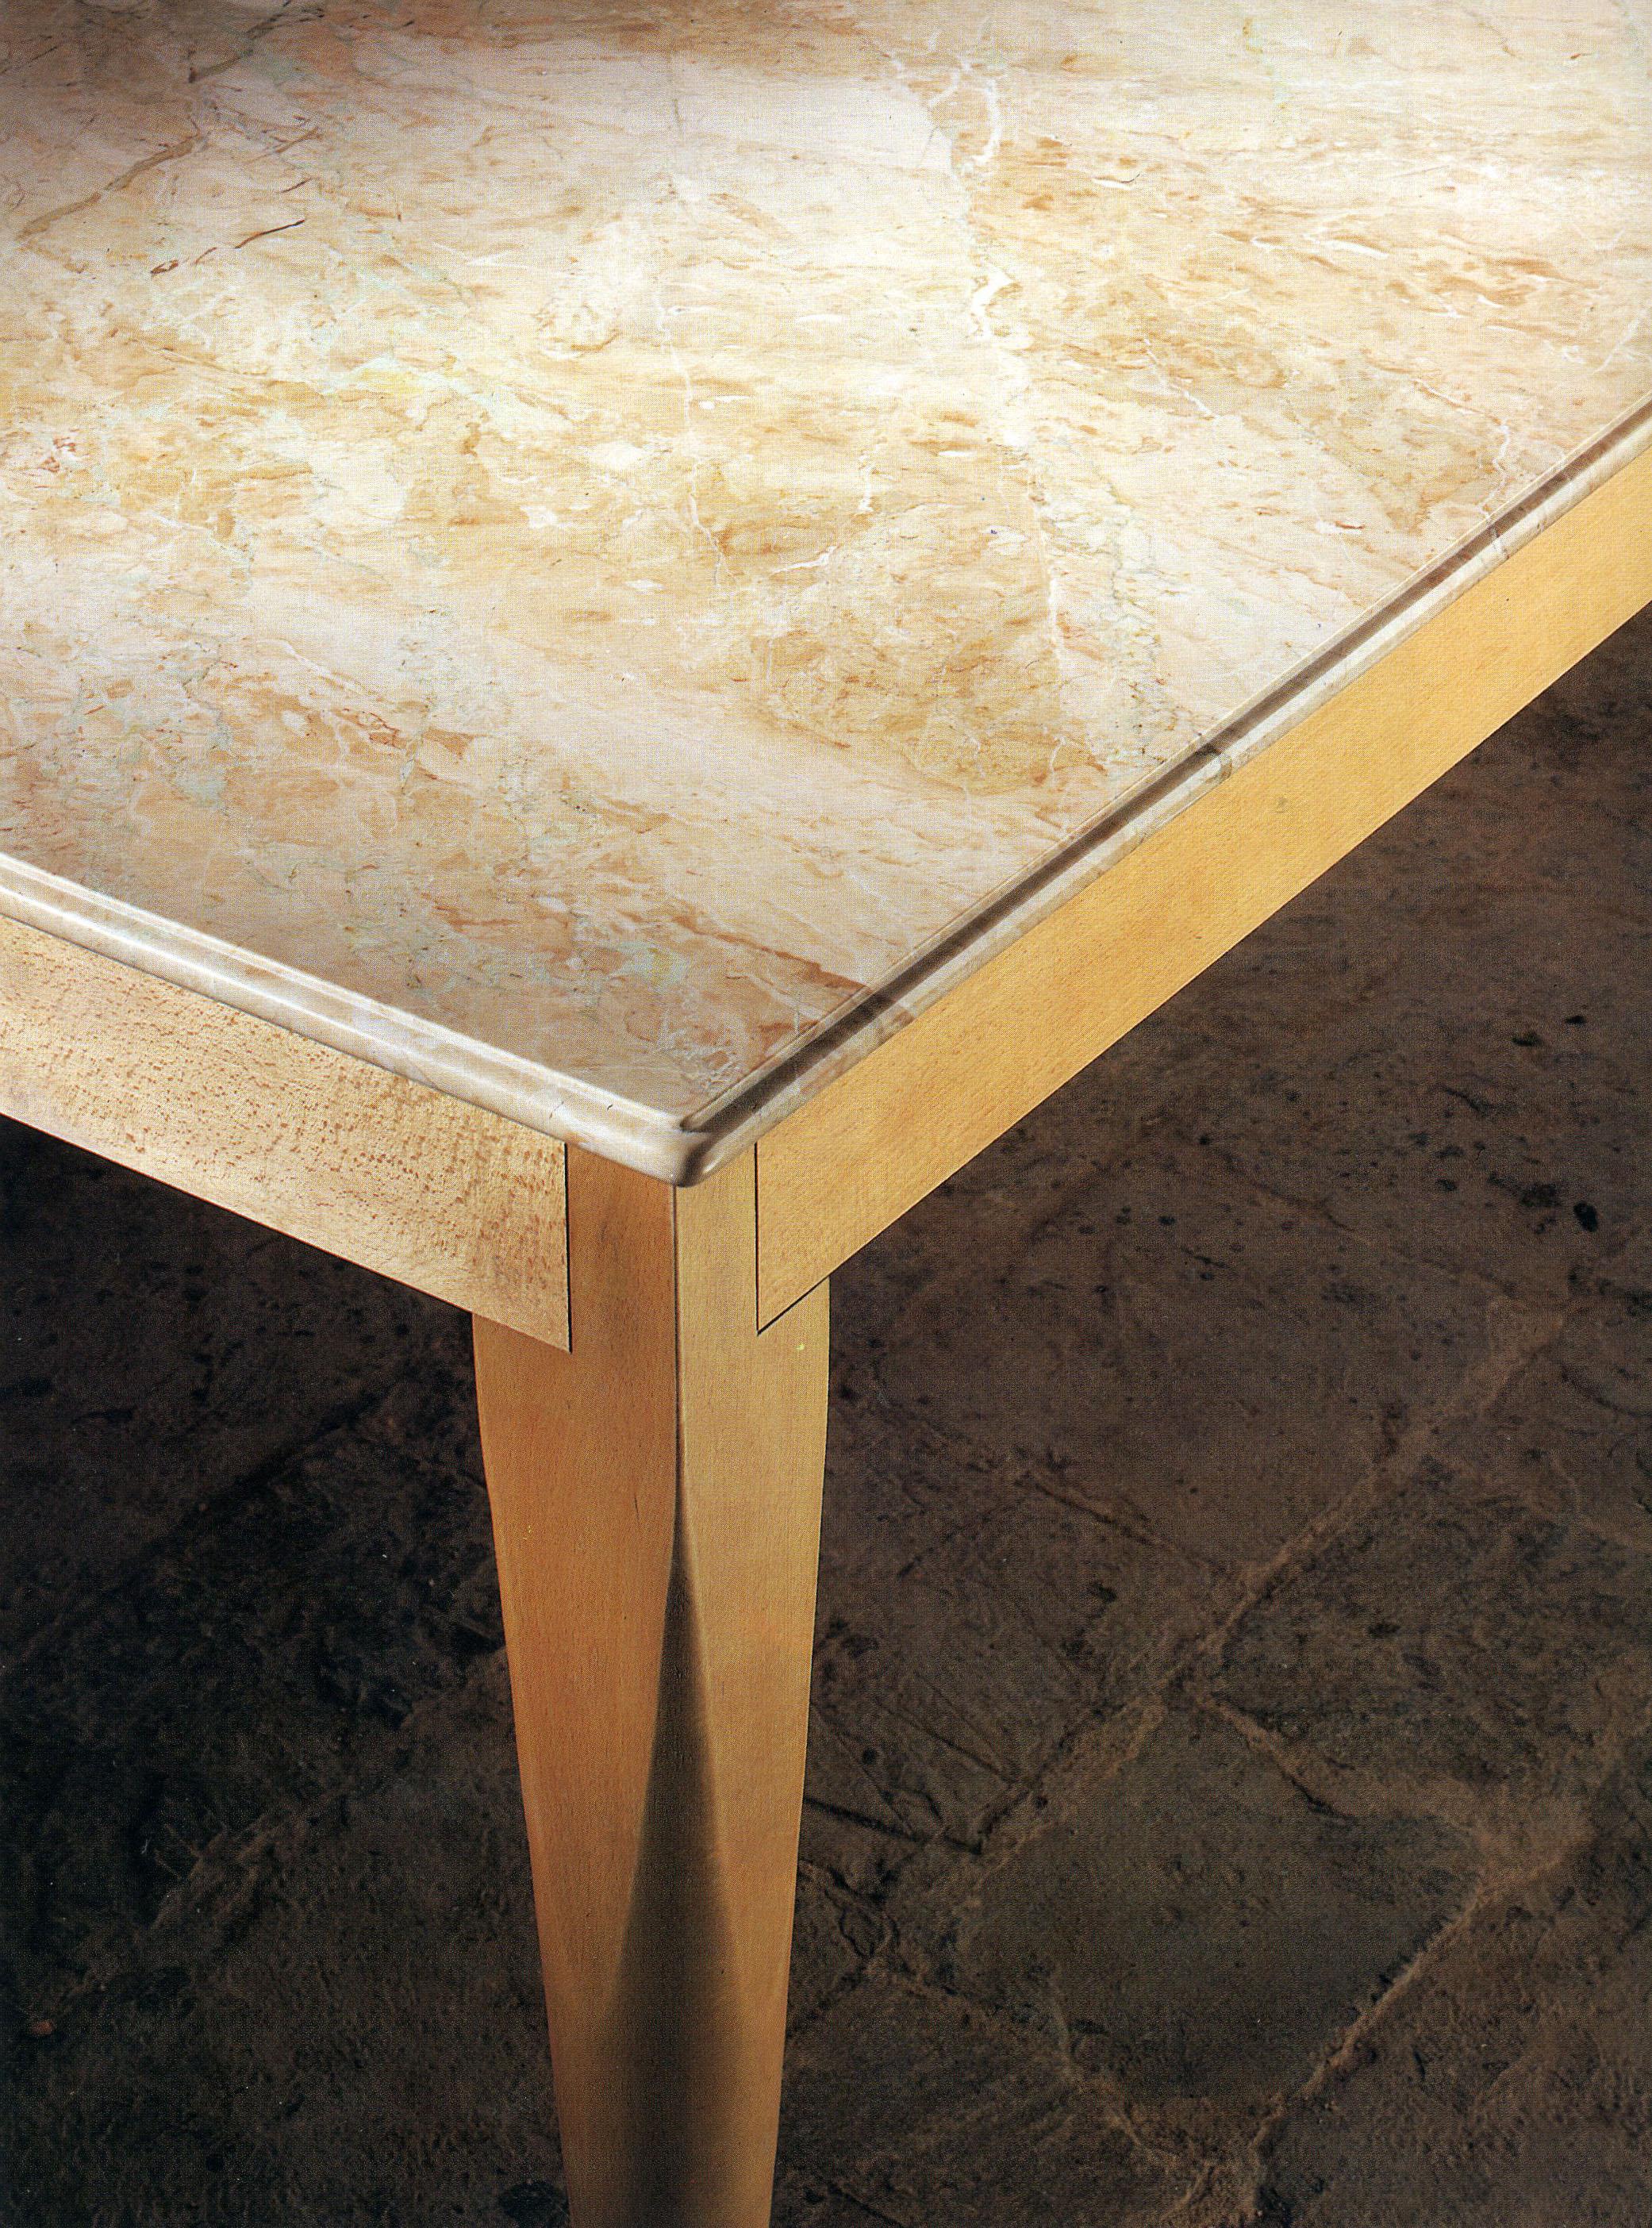 Italian 21st Century by Arch Adolfo Natalini Marble Top Table with Beech Wood Structure For Sale